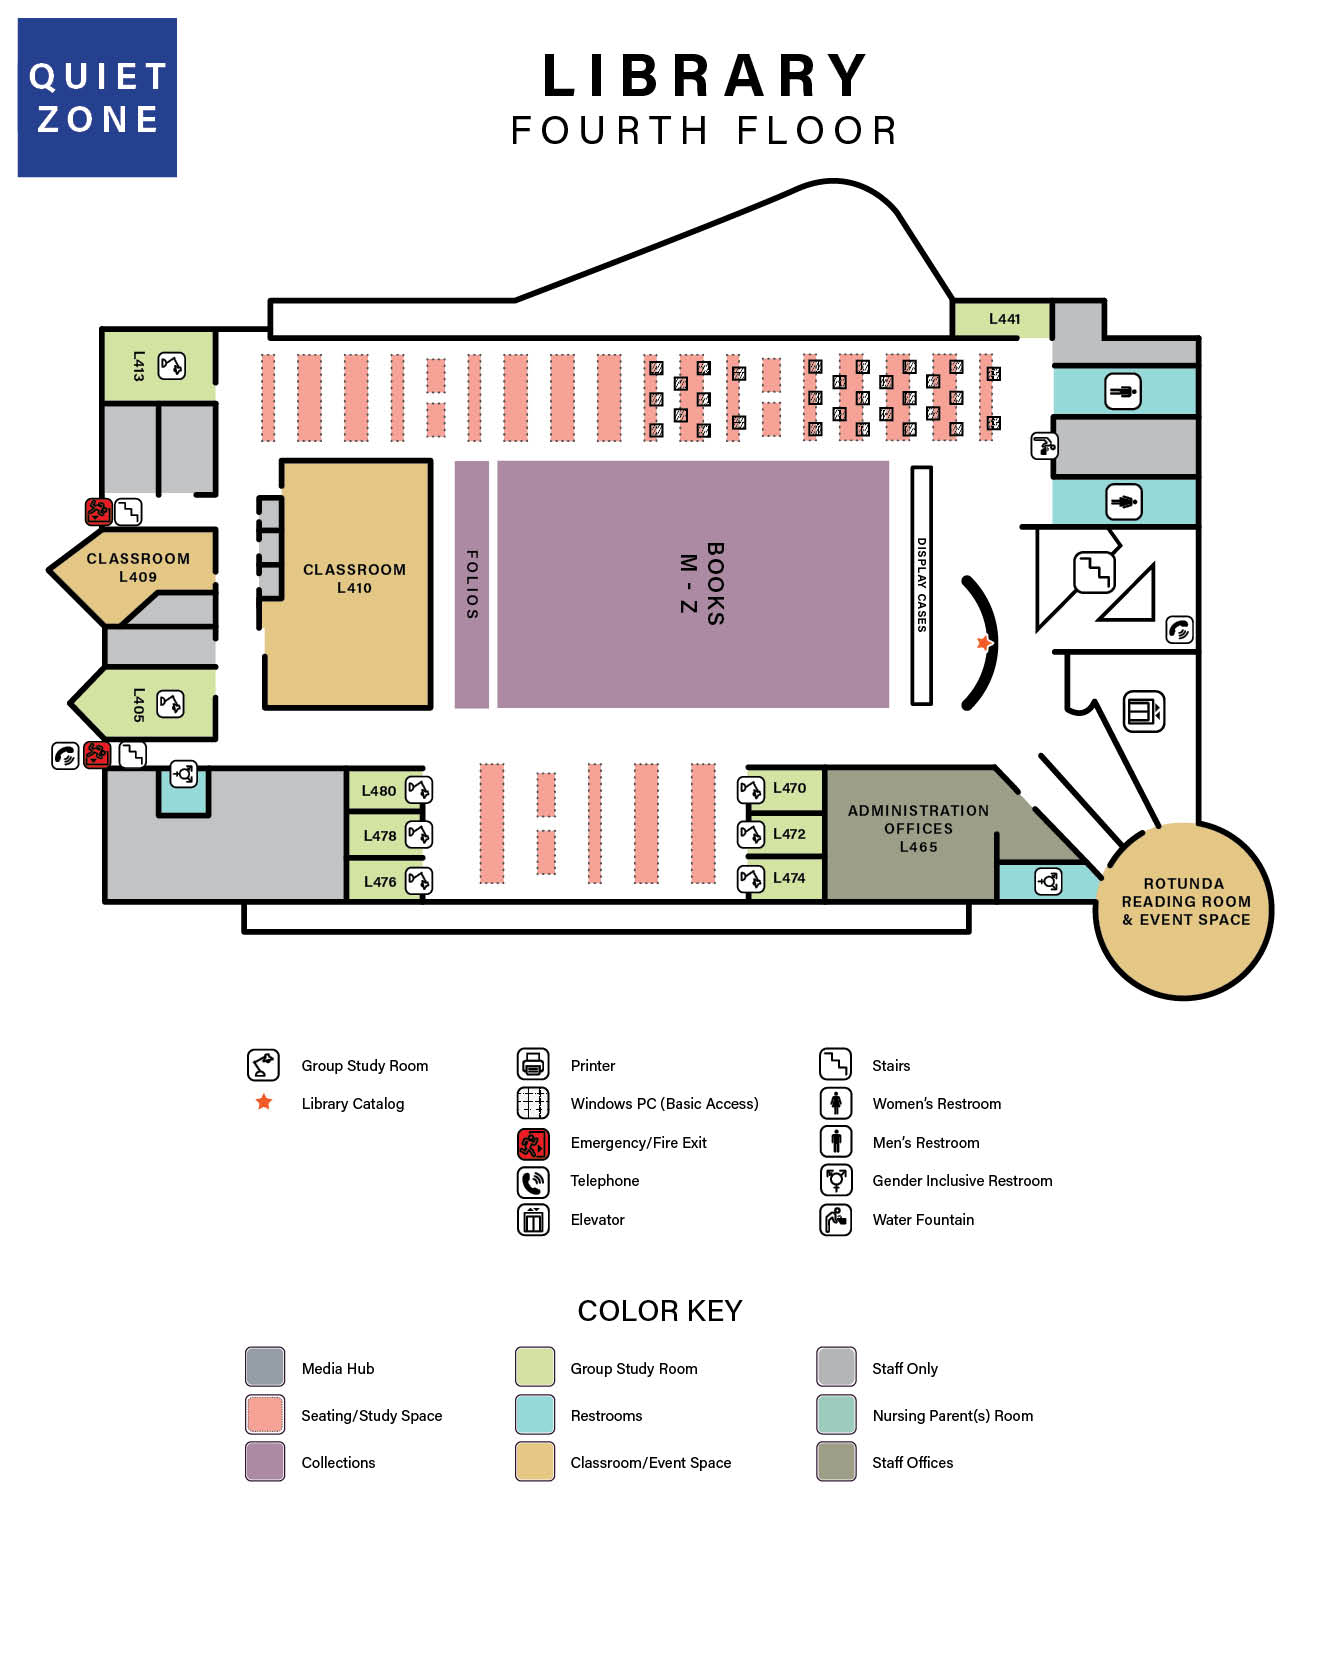 a floor map of of the library fourth floor, which shows room numbers, and space names, and also includes information such as stairwell access, emergency exits, bathrooms, etc.